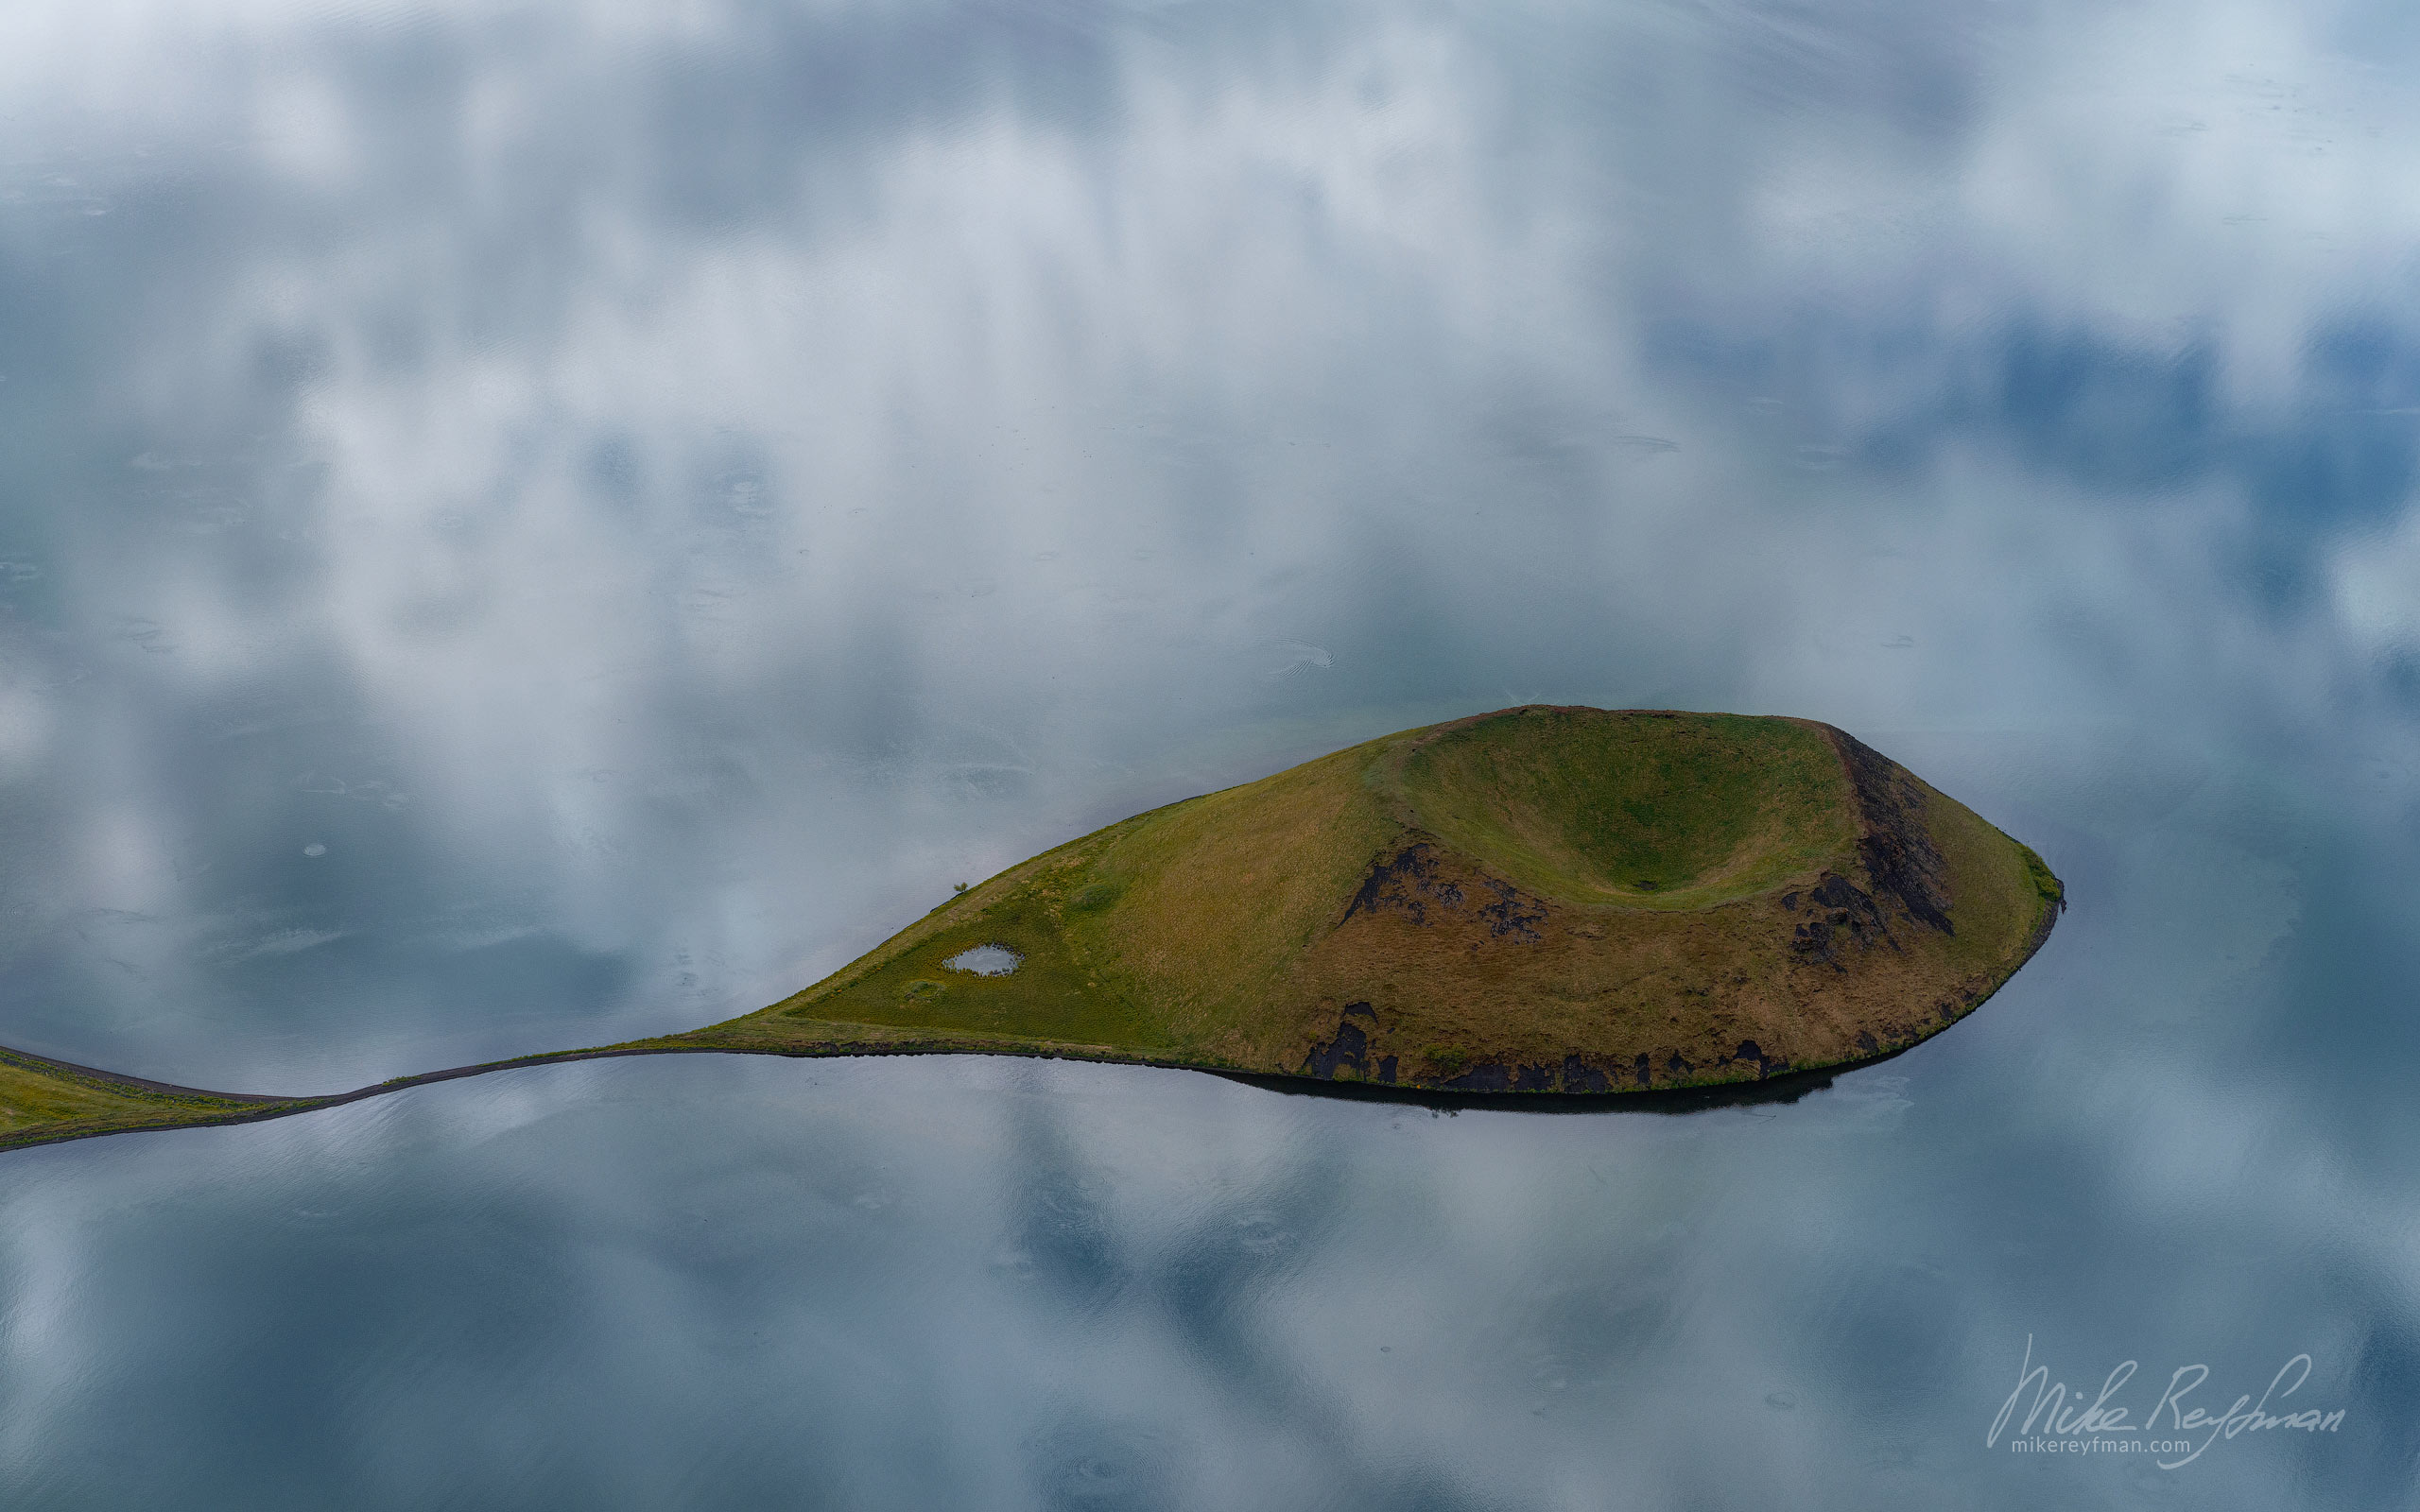 Pseudocrater in Lake Myvatn, Northeastern Region, Iceland IC-CL AR-06 _D8B2589 - Rhyolite Mountains, Crater Lakes, Geothermal Areas, Lava Fields and Glacial Rivers. Iceland.  - Mike Reyfman Photography